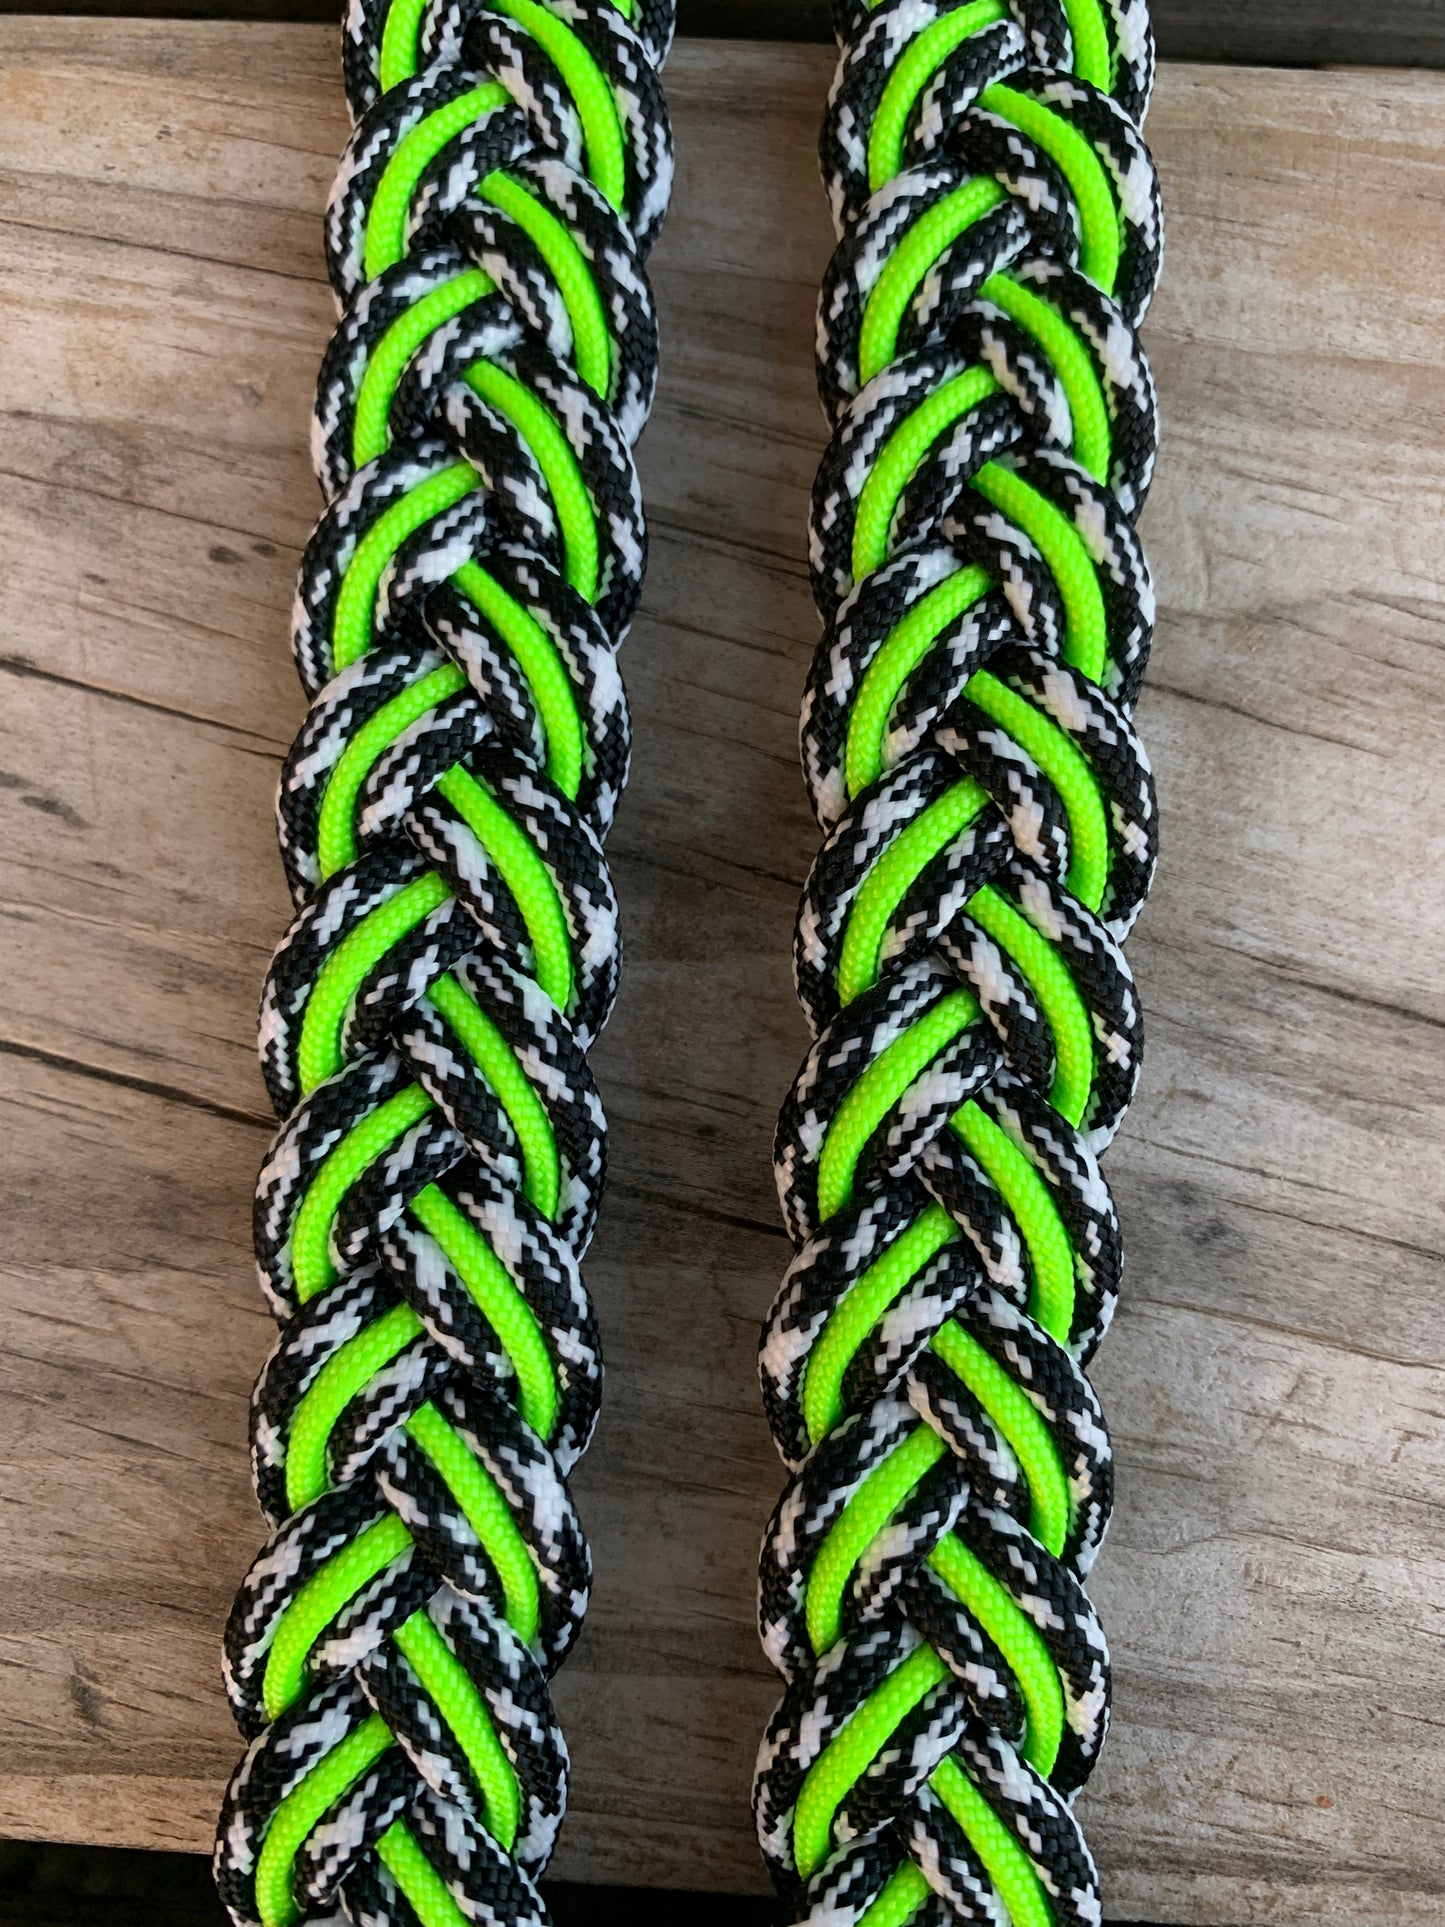 Green and cow print reins